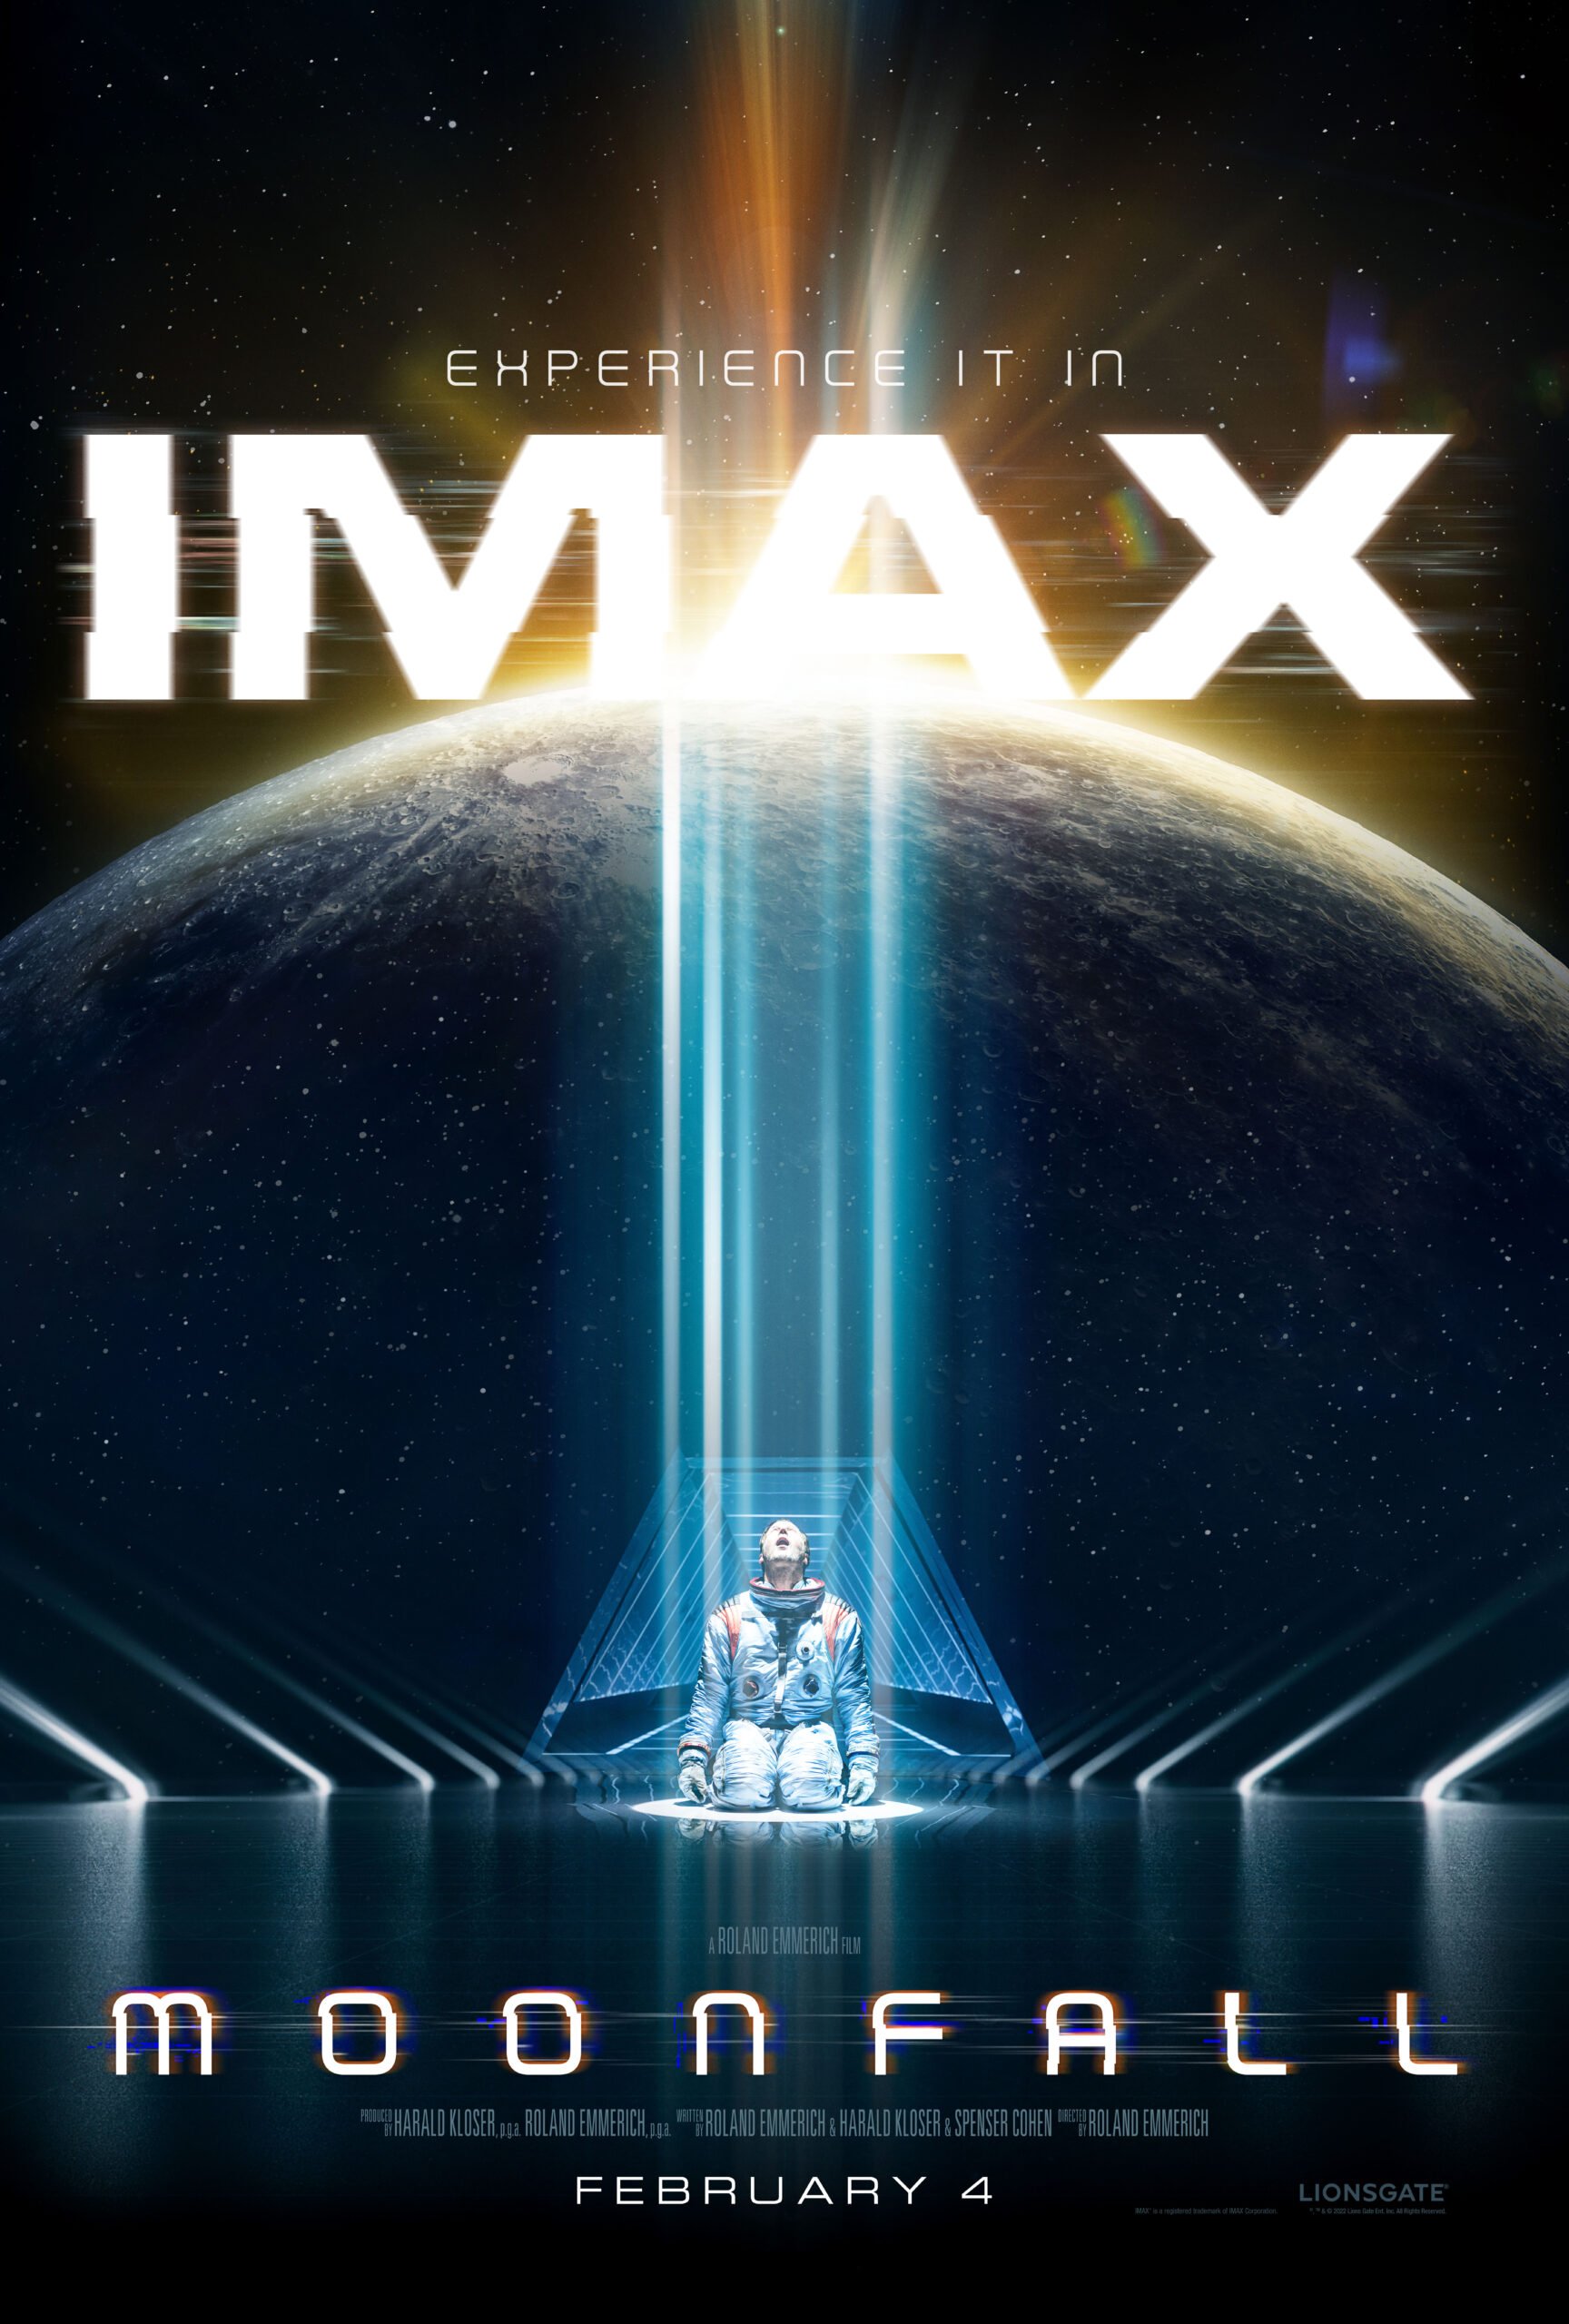 The IMAX poster for the movie Moonfall